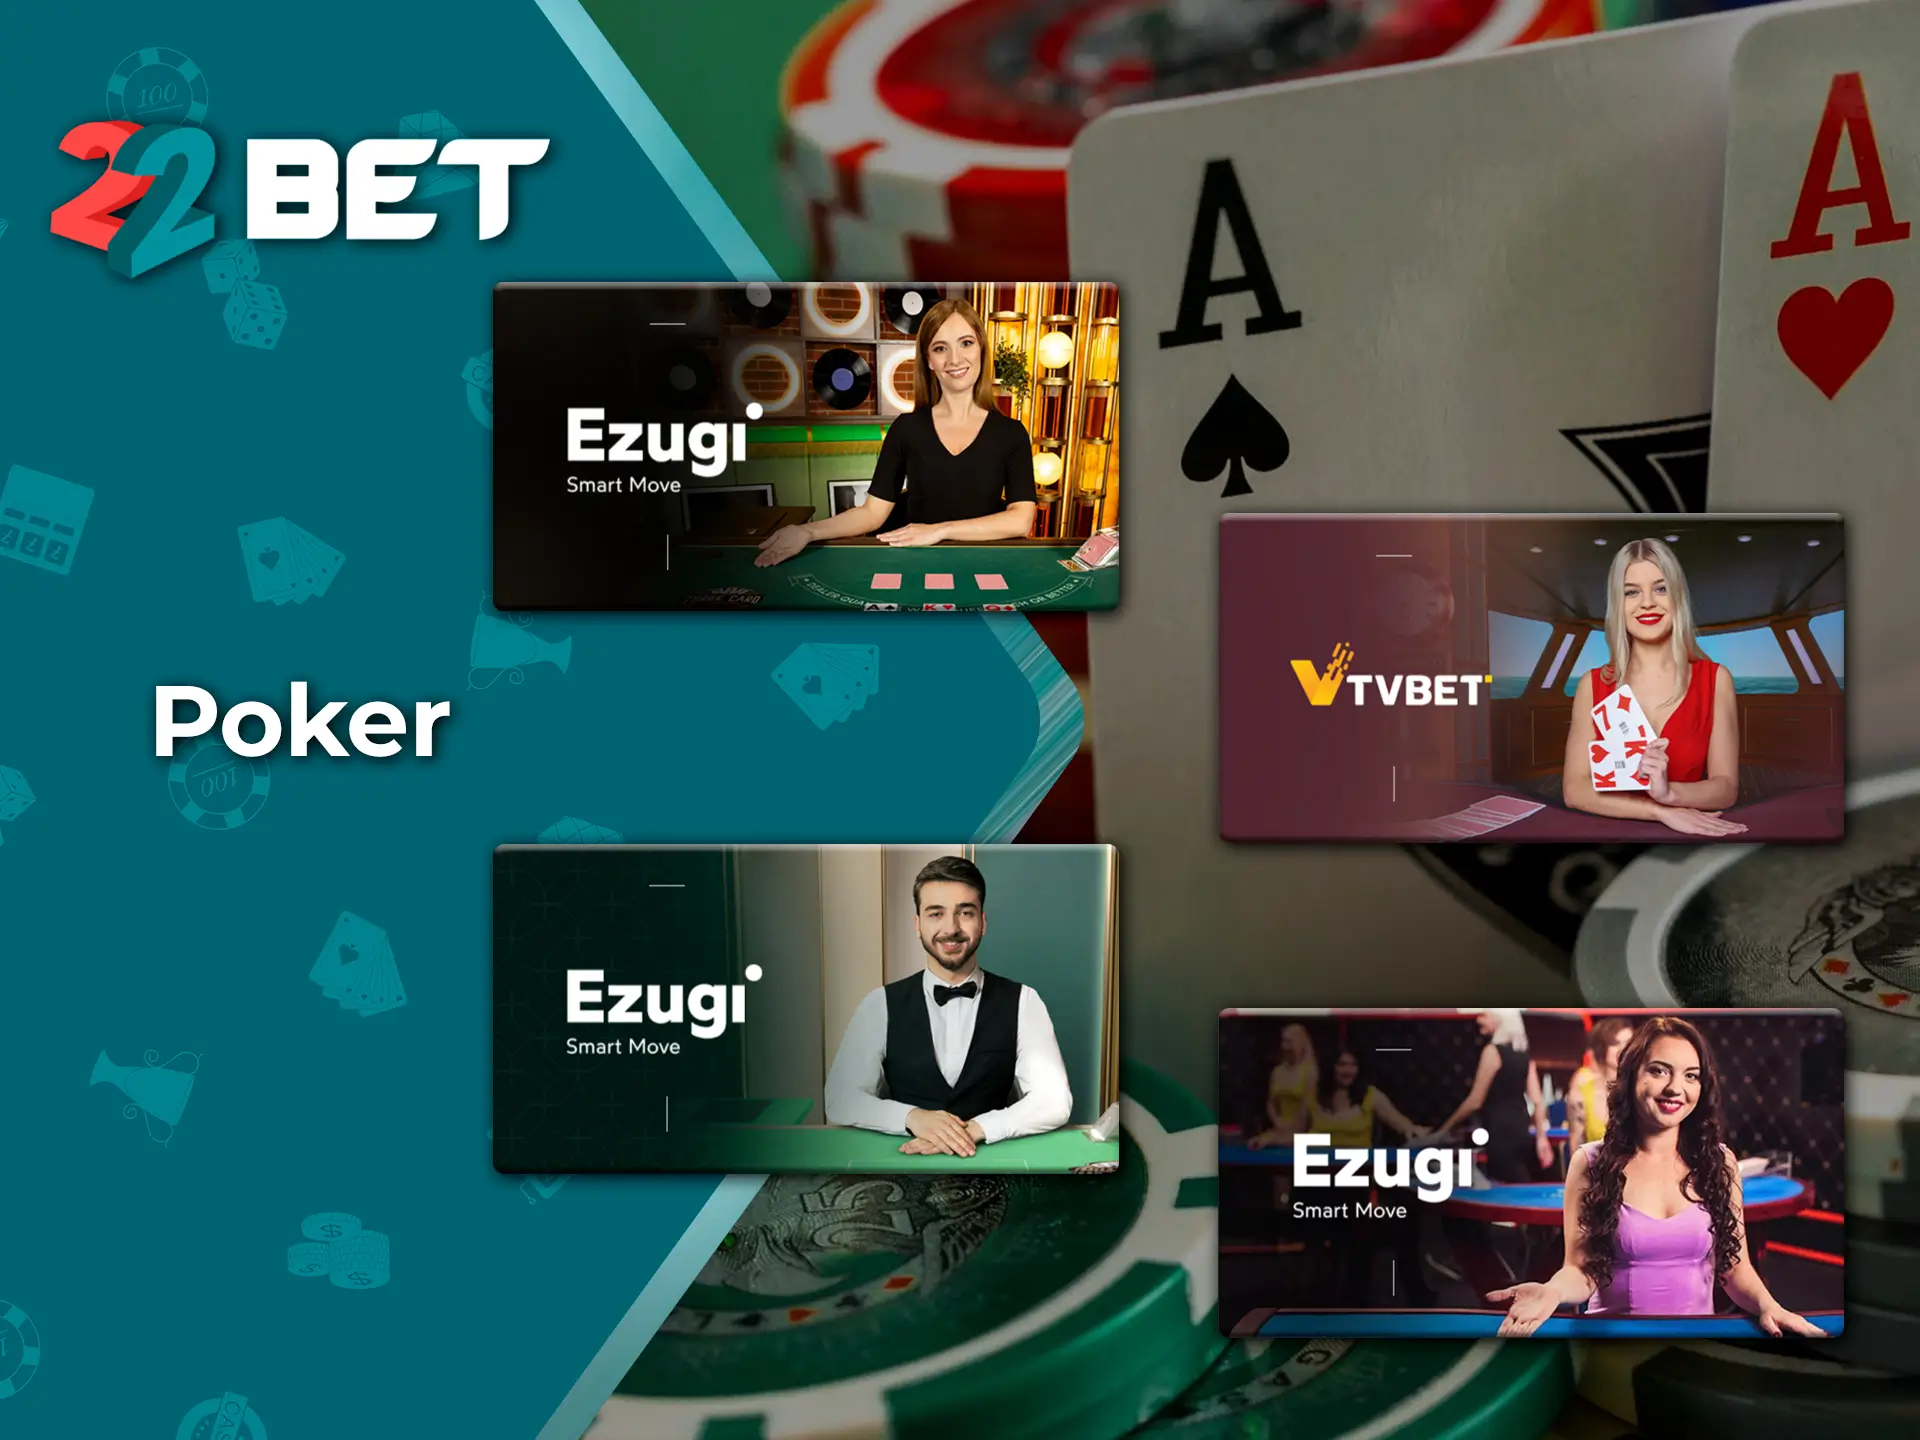 Use defensive or attacking tactics when playing Poker from 22Bet Casino.